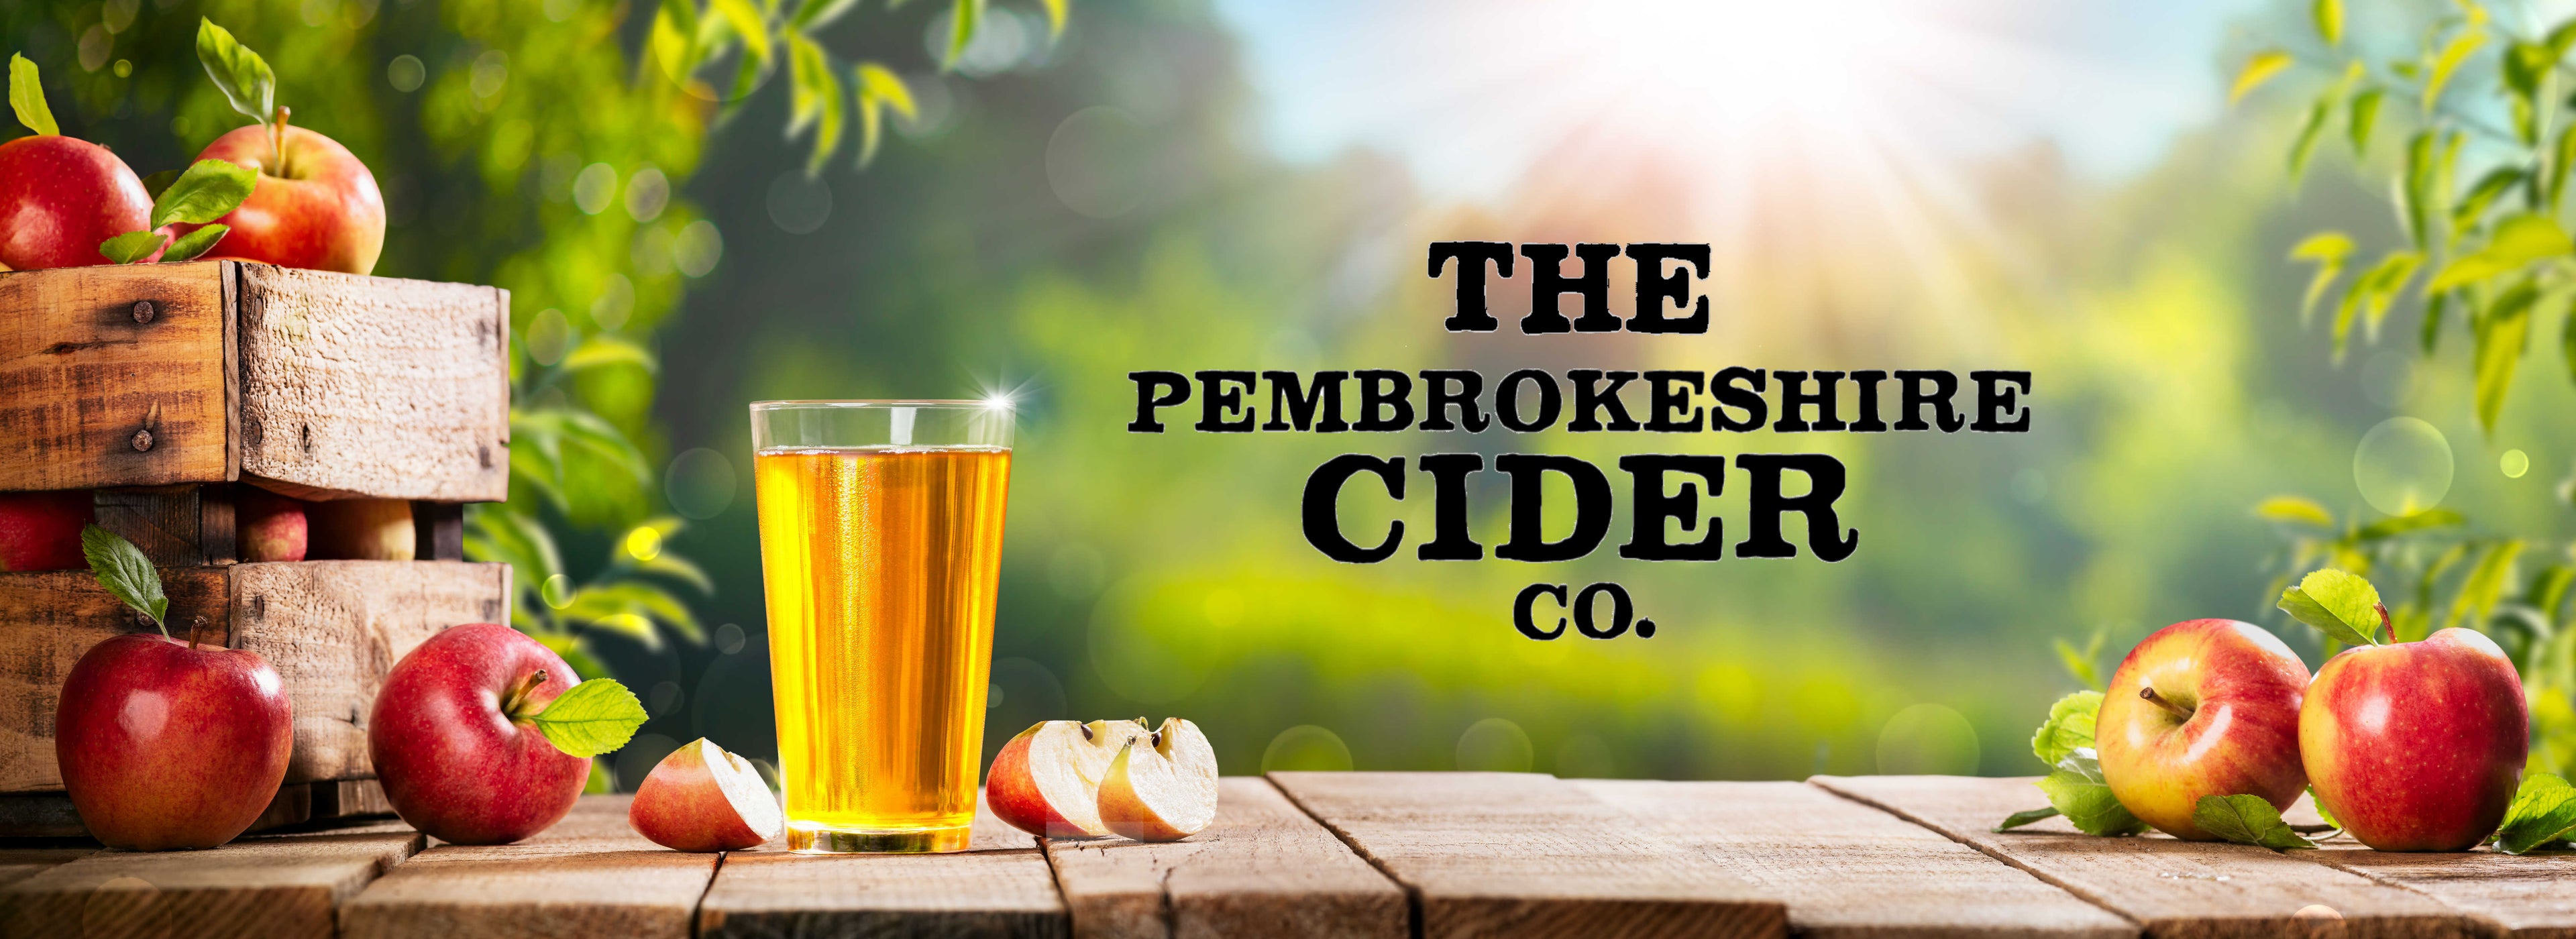 The Pembrokeshire Cider Co banner